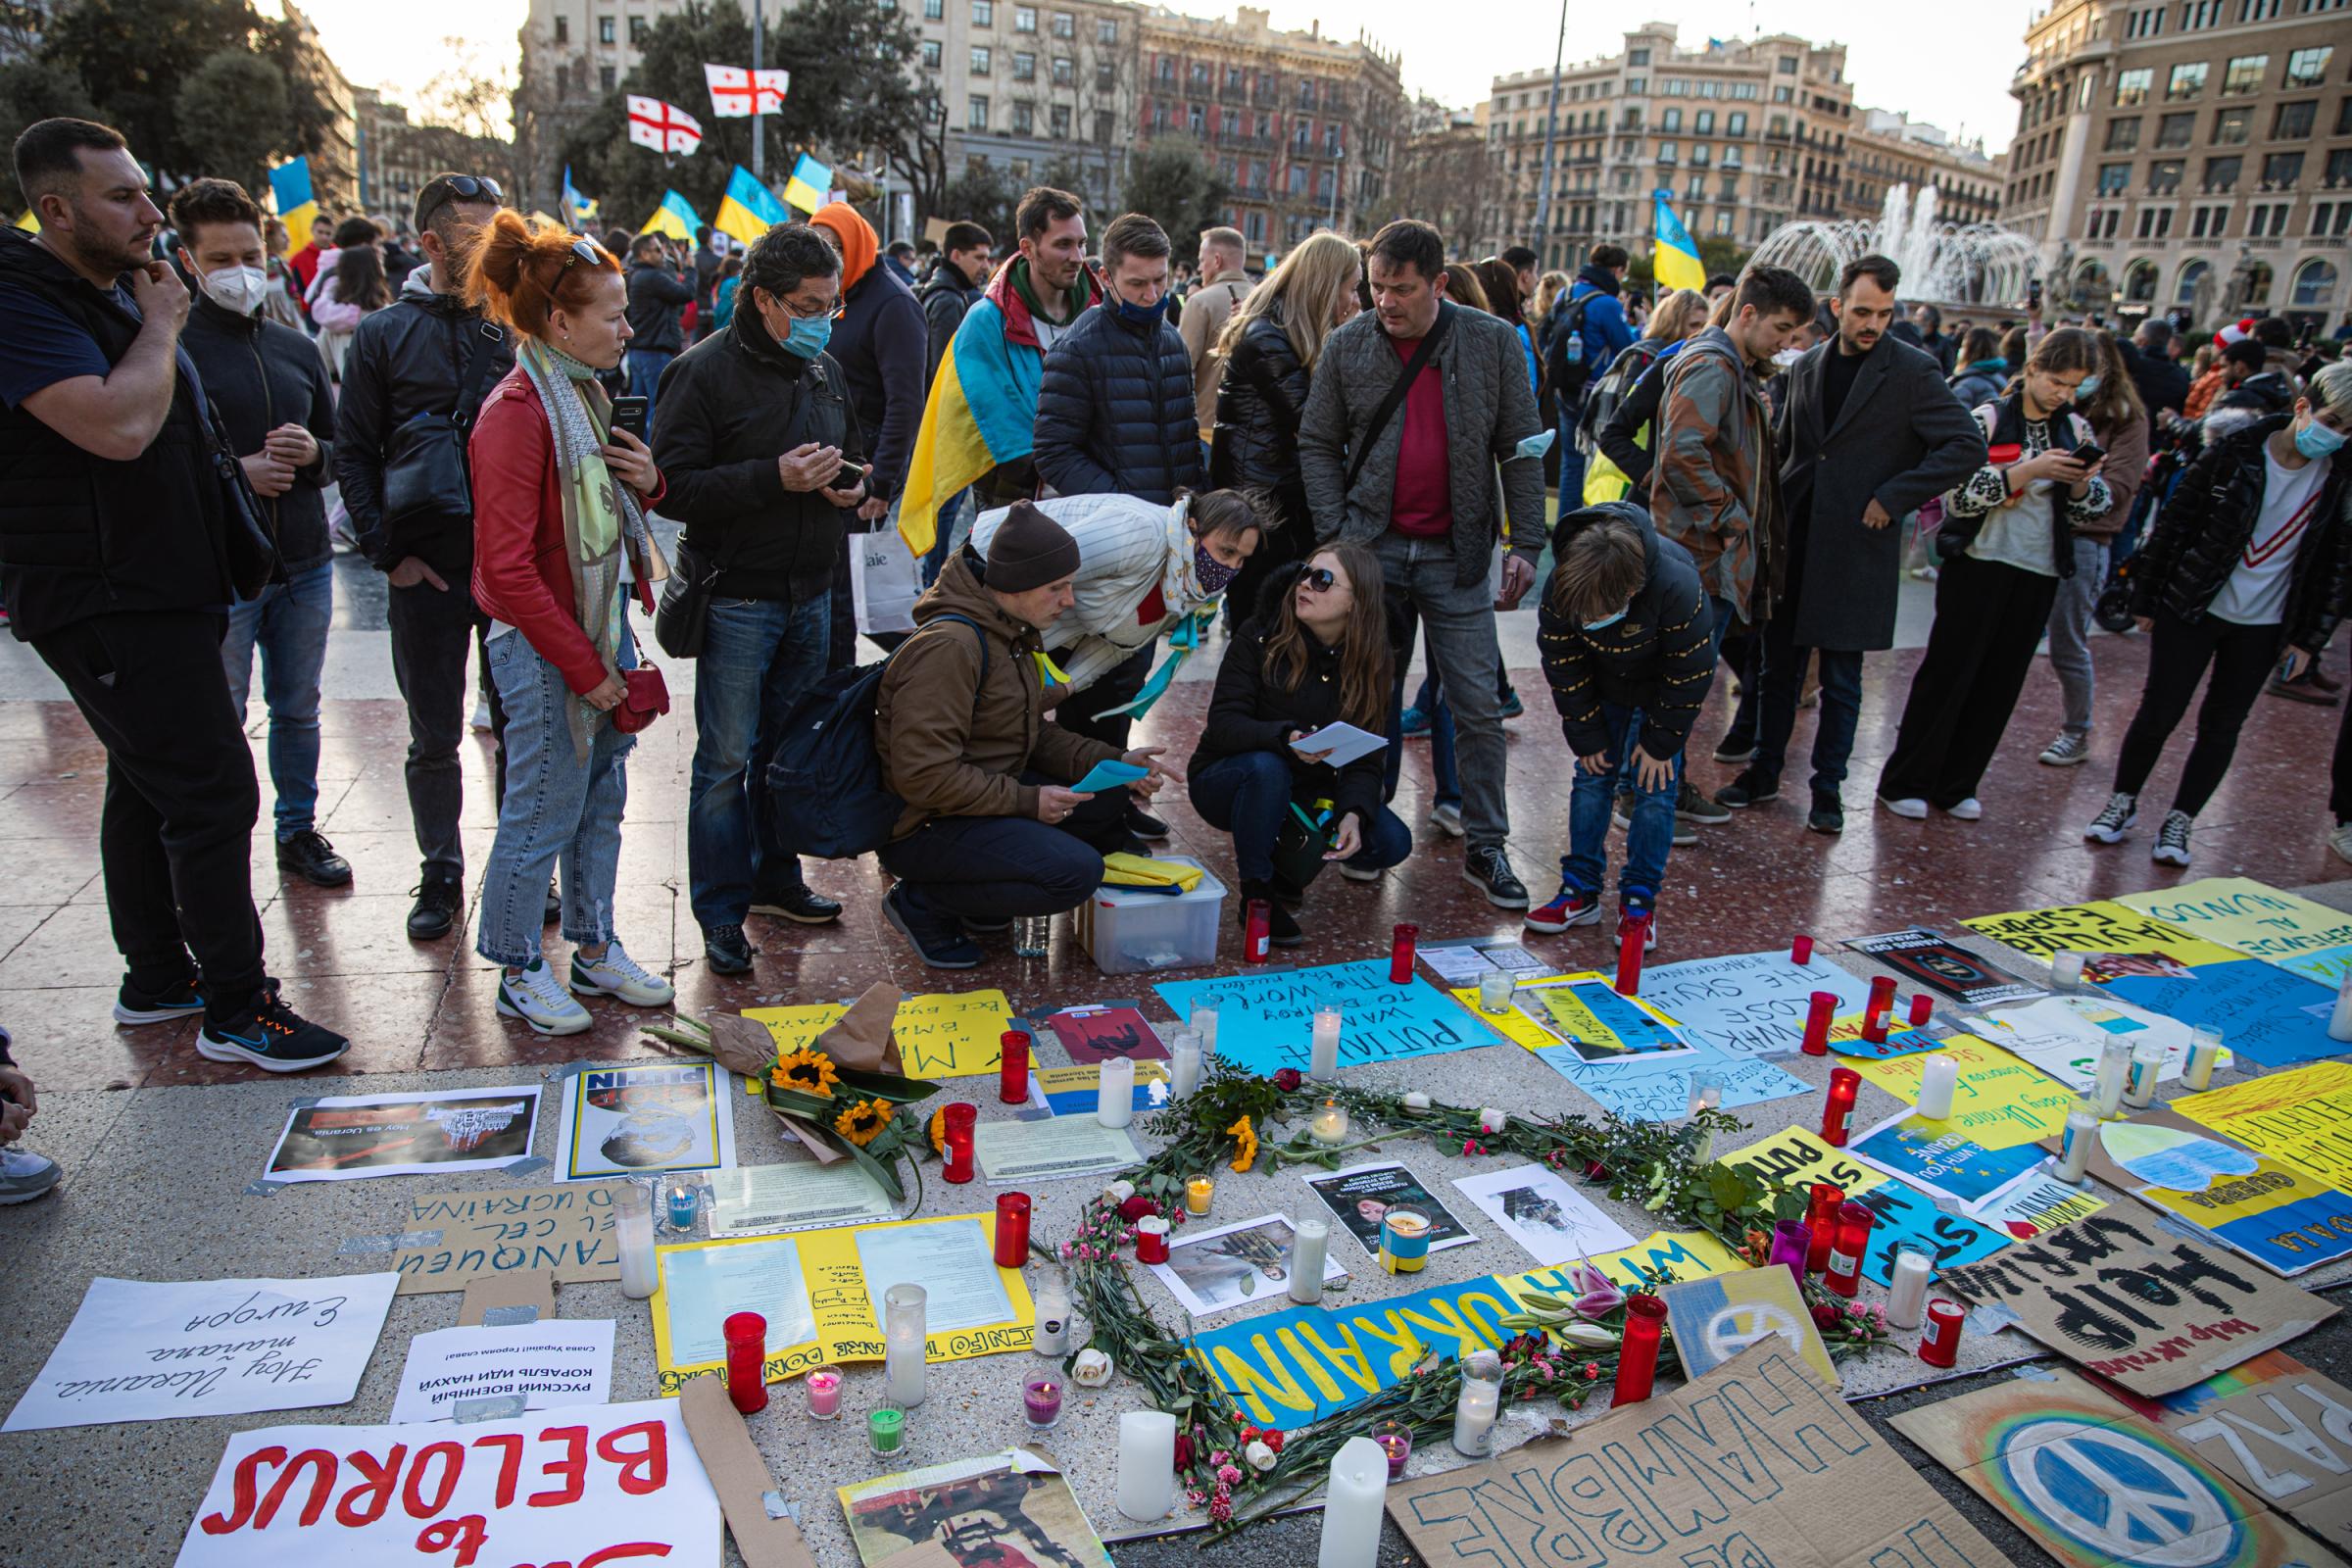 Protestors In Spain Rally For Ukraine After Russian Invasion - BARCELONA, SPAIN - FEBRUARY 27: People take part in a...